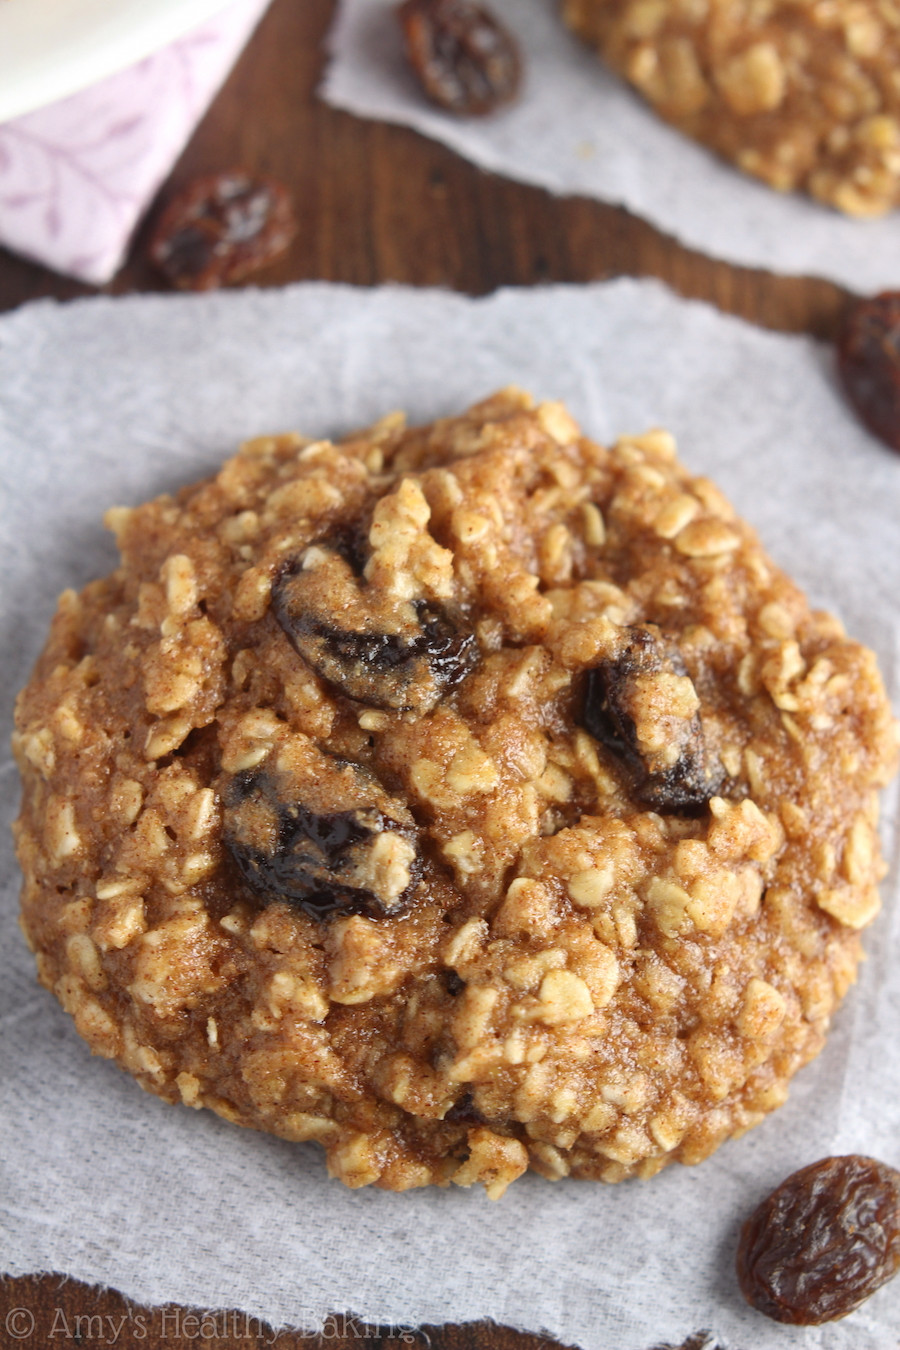 Oatmeal Cookies Healthy
 The Ultimate Healthy Soft & Chewy Oatmeal Raisin Cookies